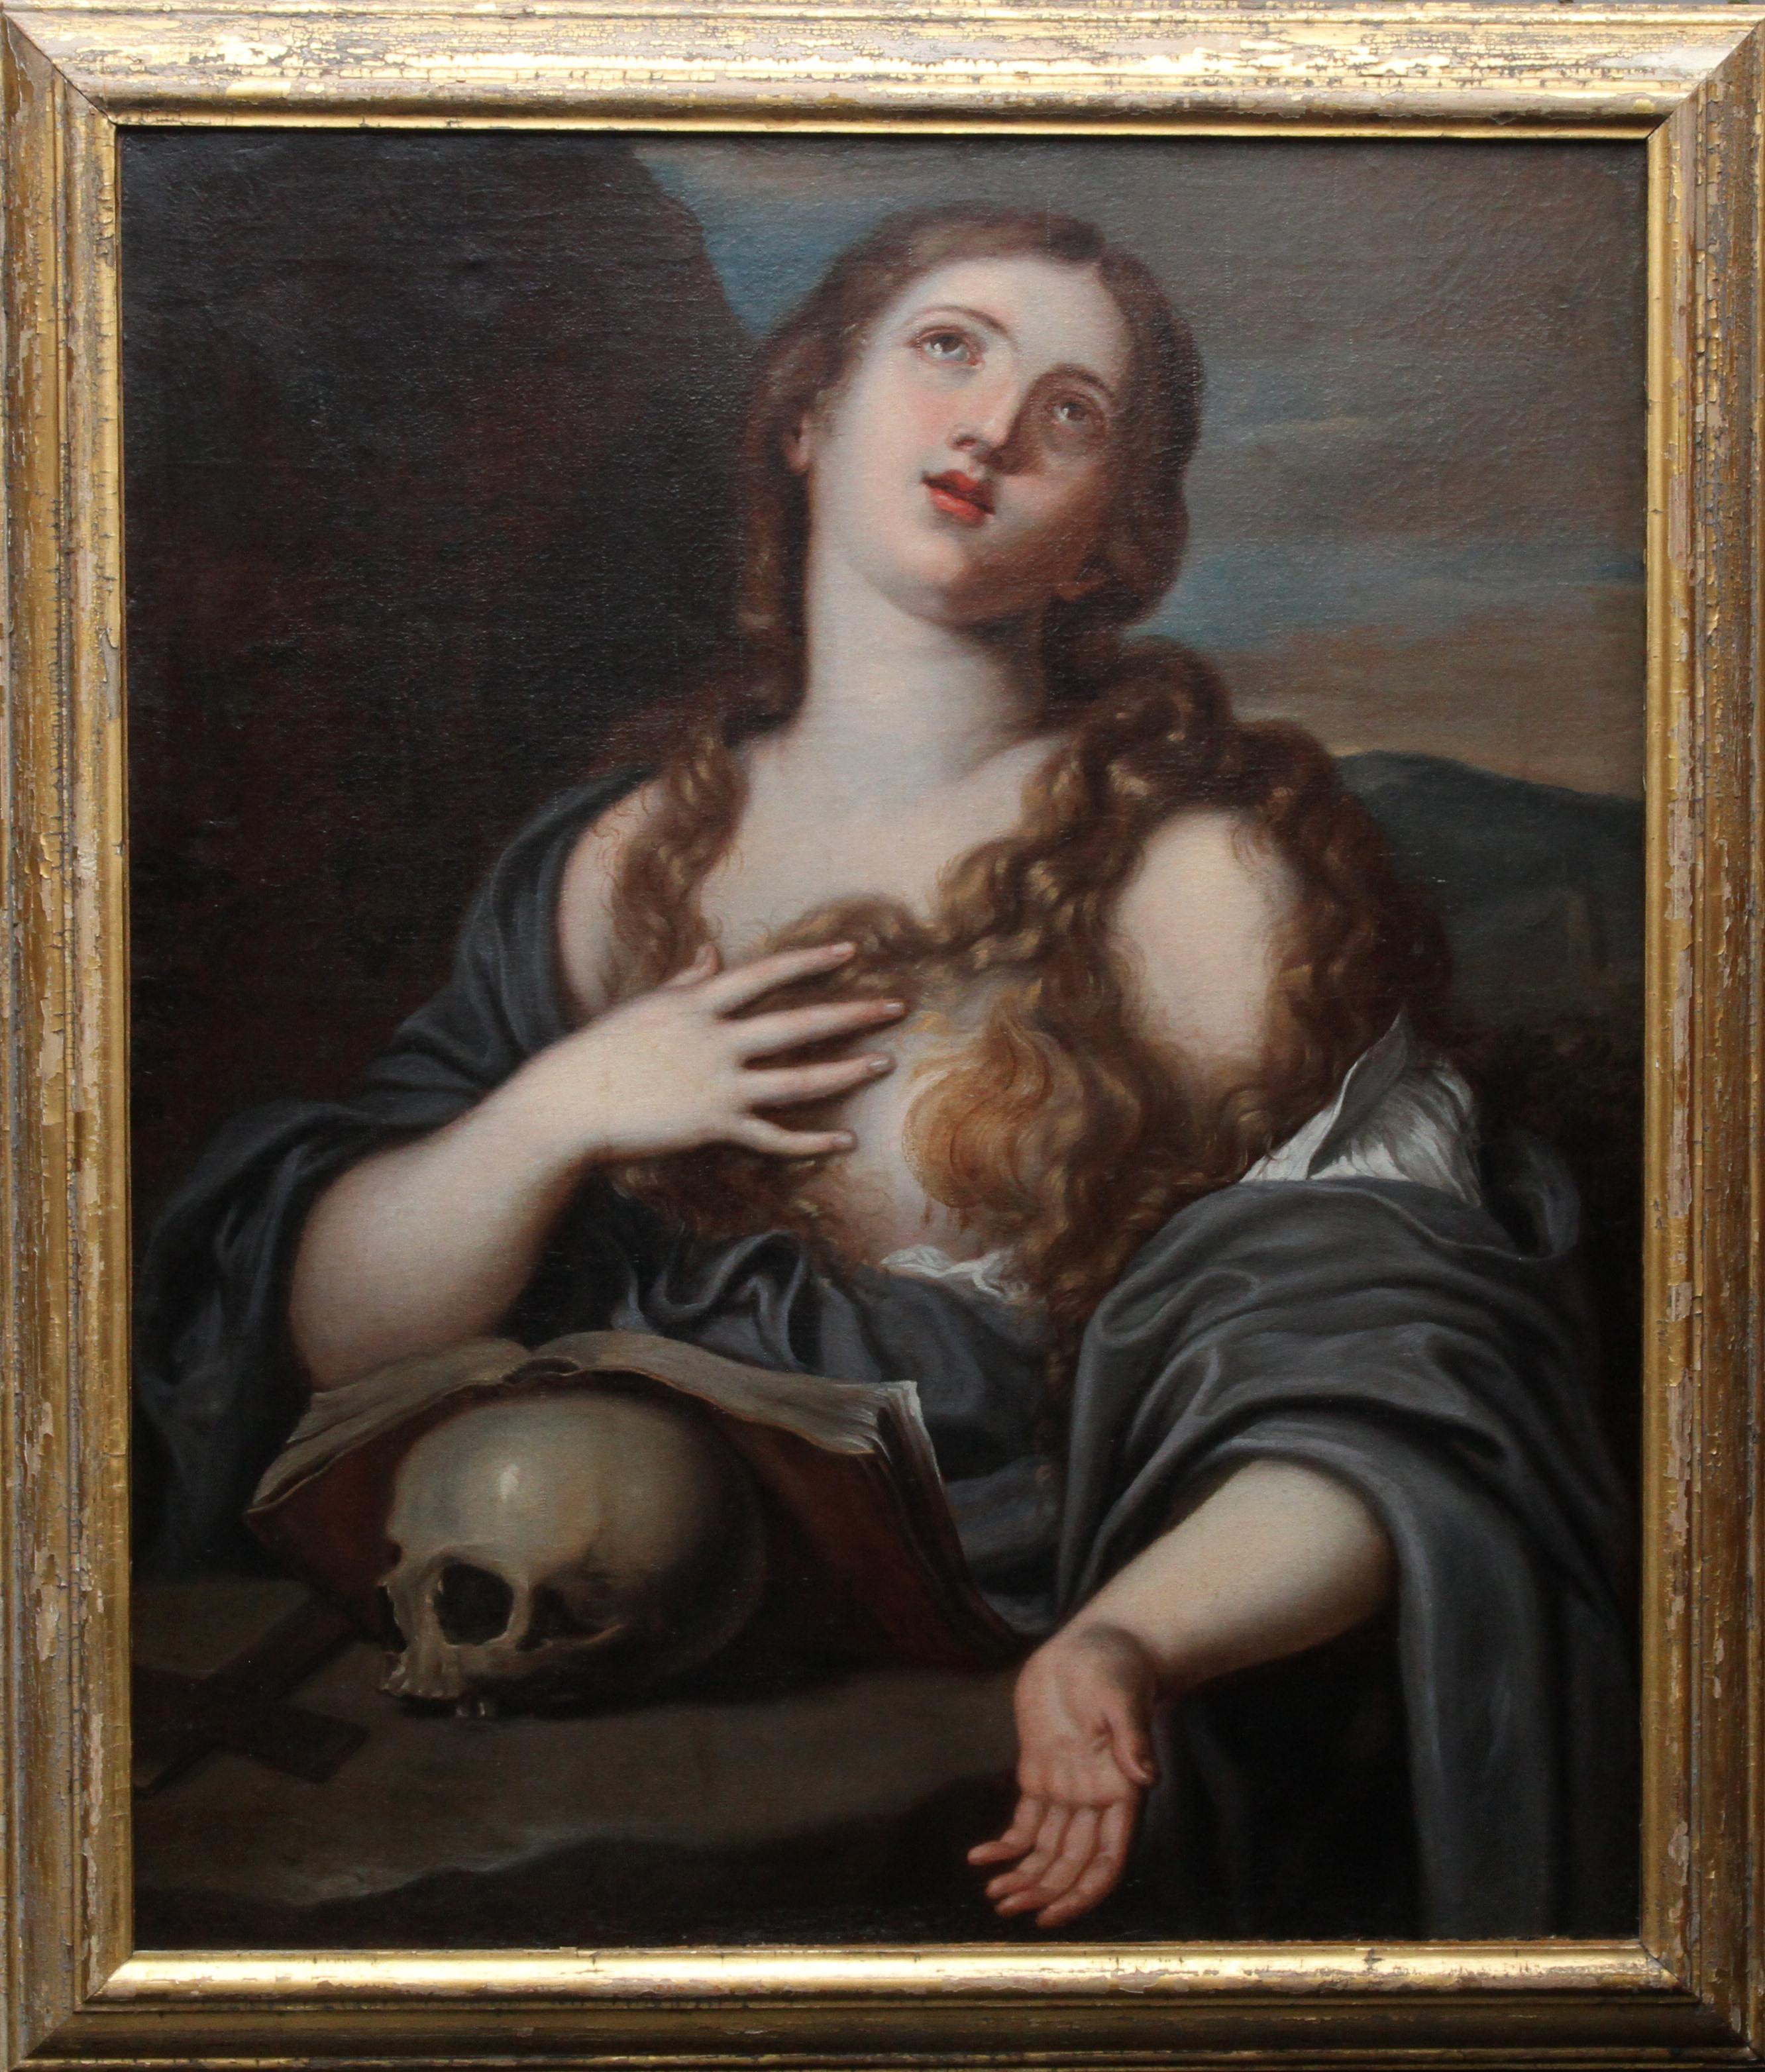 Unknown Portrait Painting - Mary Magdalene with Book and Skull - Old Master Italian religious oil portrait